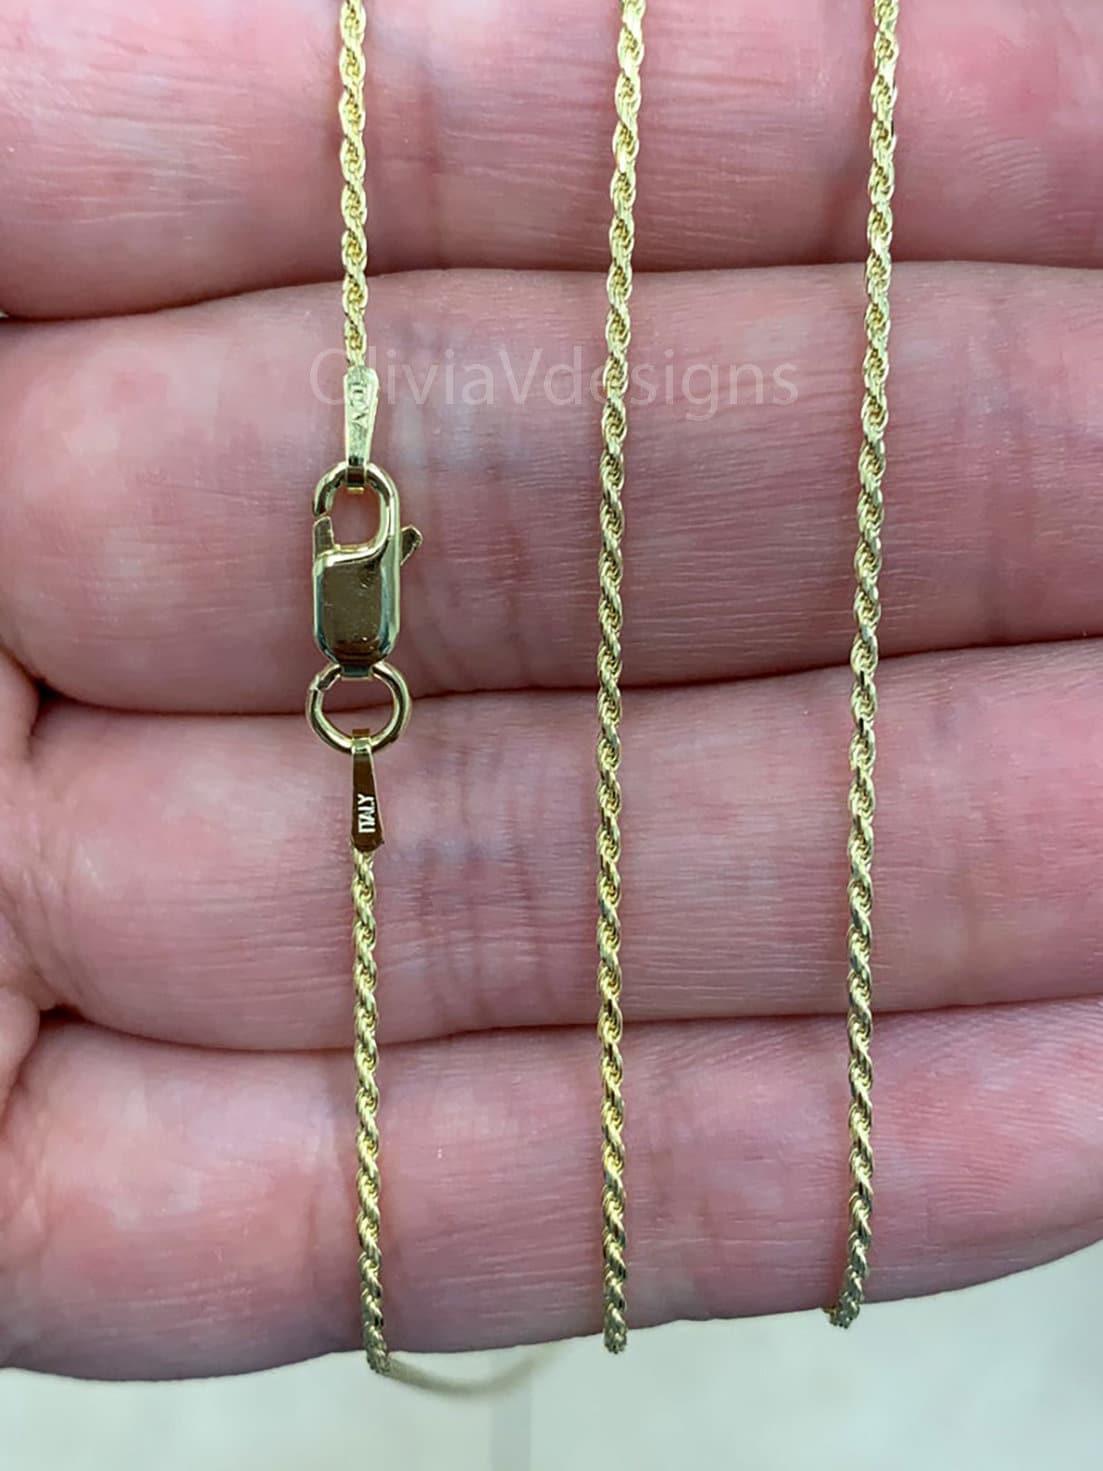 14k Gold Vermeil Solid 925 Sterling Silver Snake Chain Necklace 14-30 1.5mm